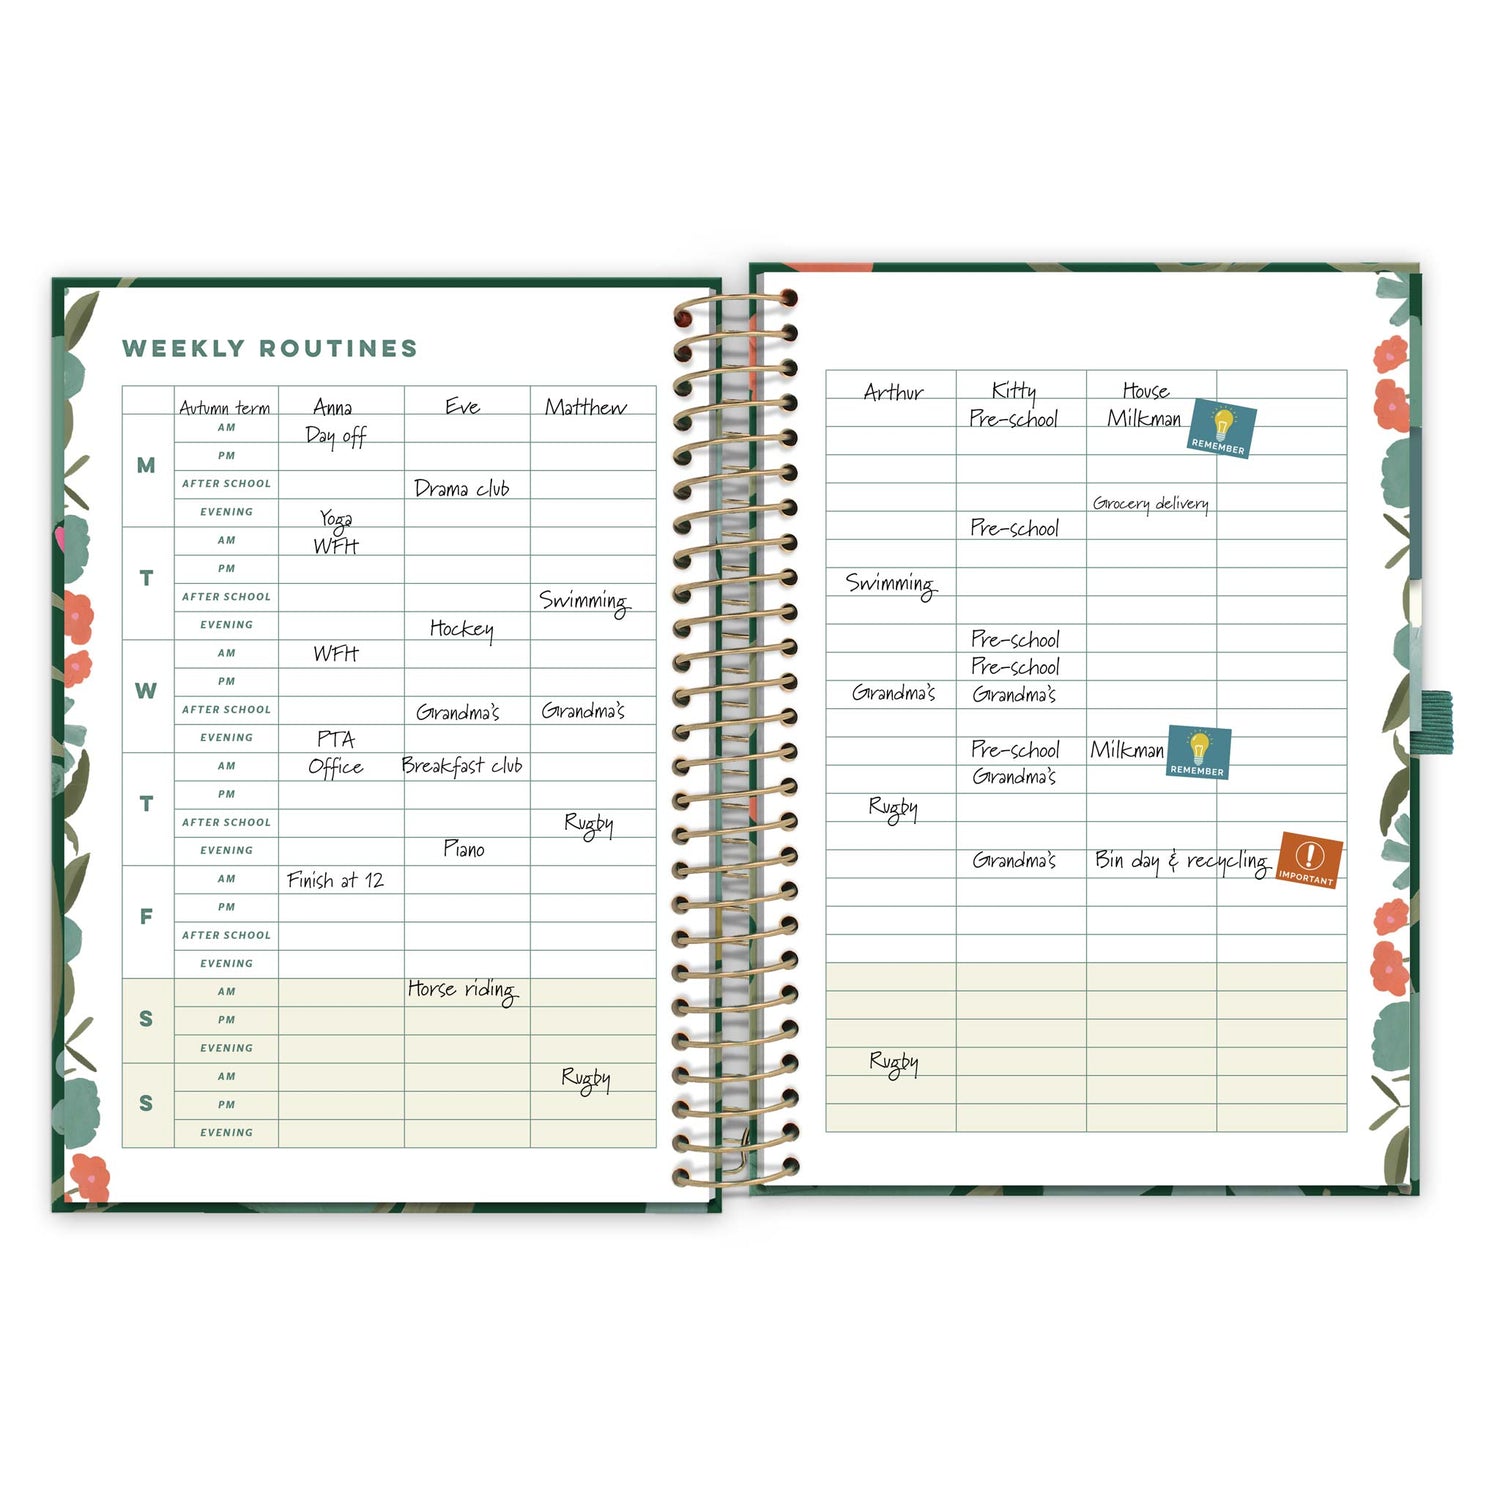 An open diary page with floral pattern showing a weekly routines timetable, writing and stickers